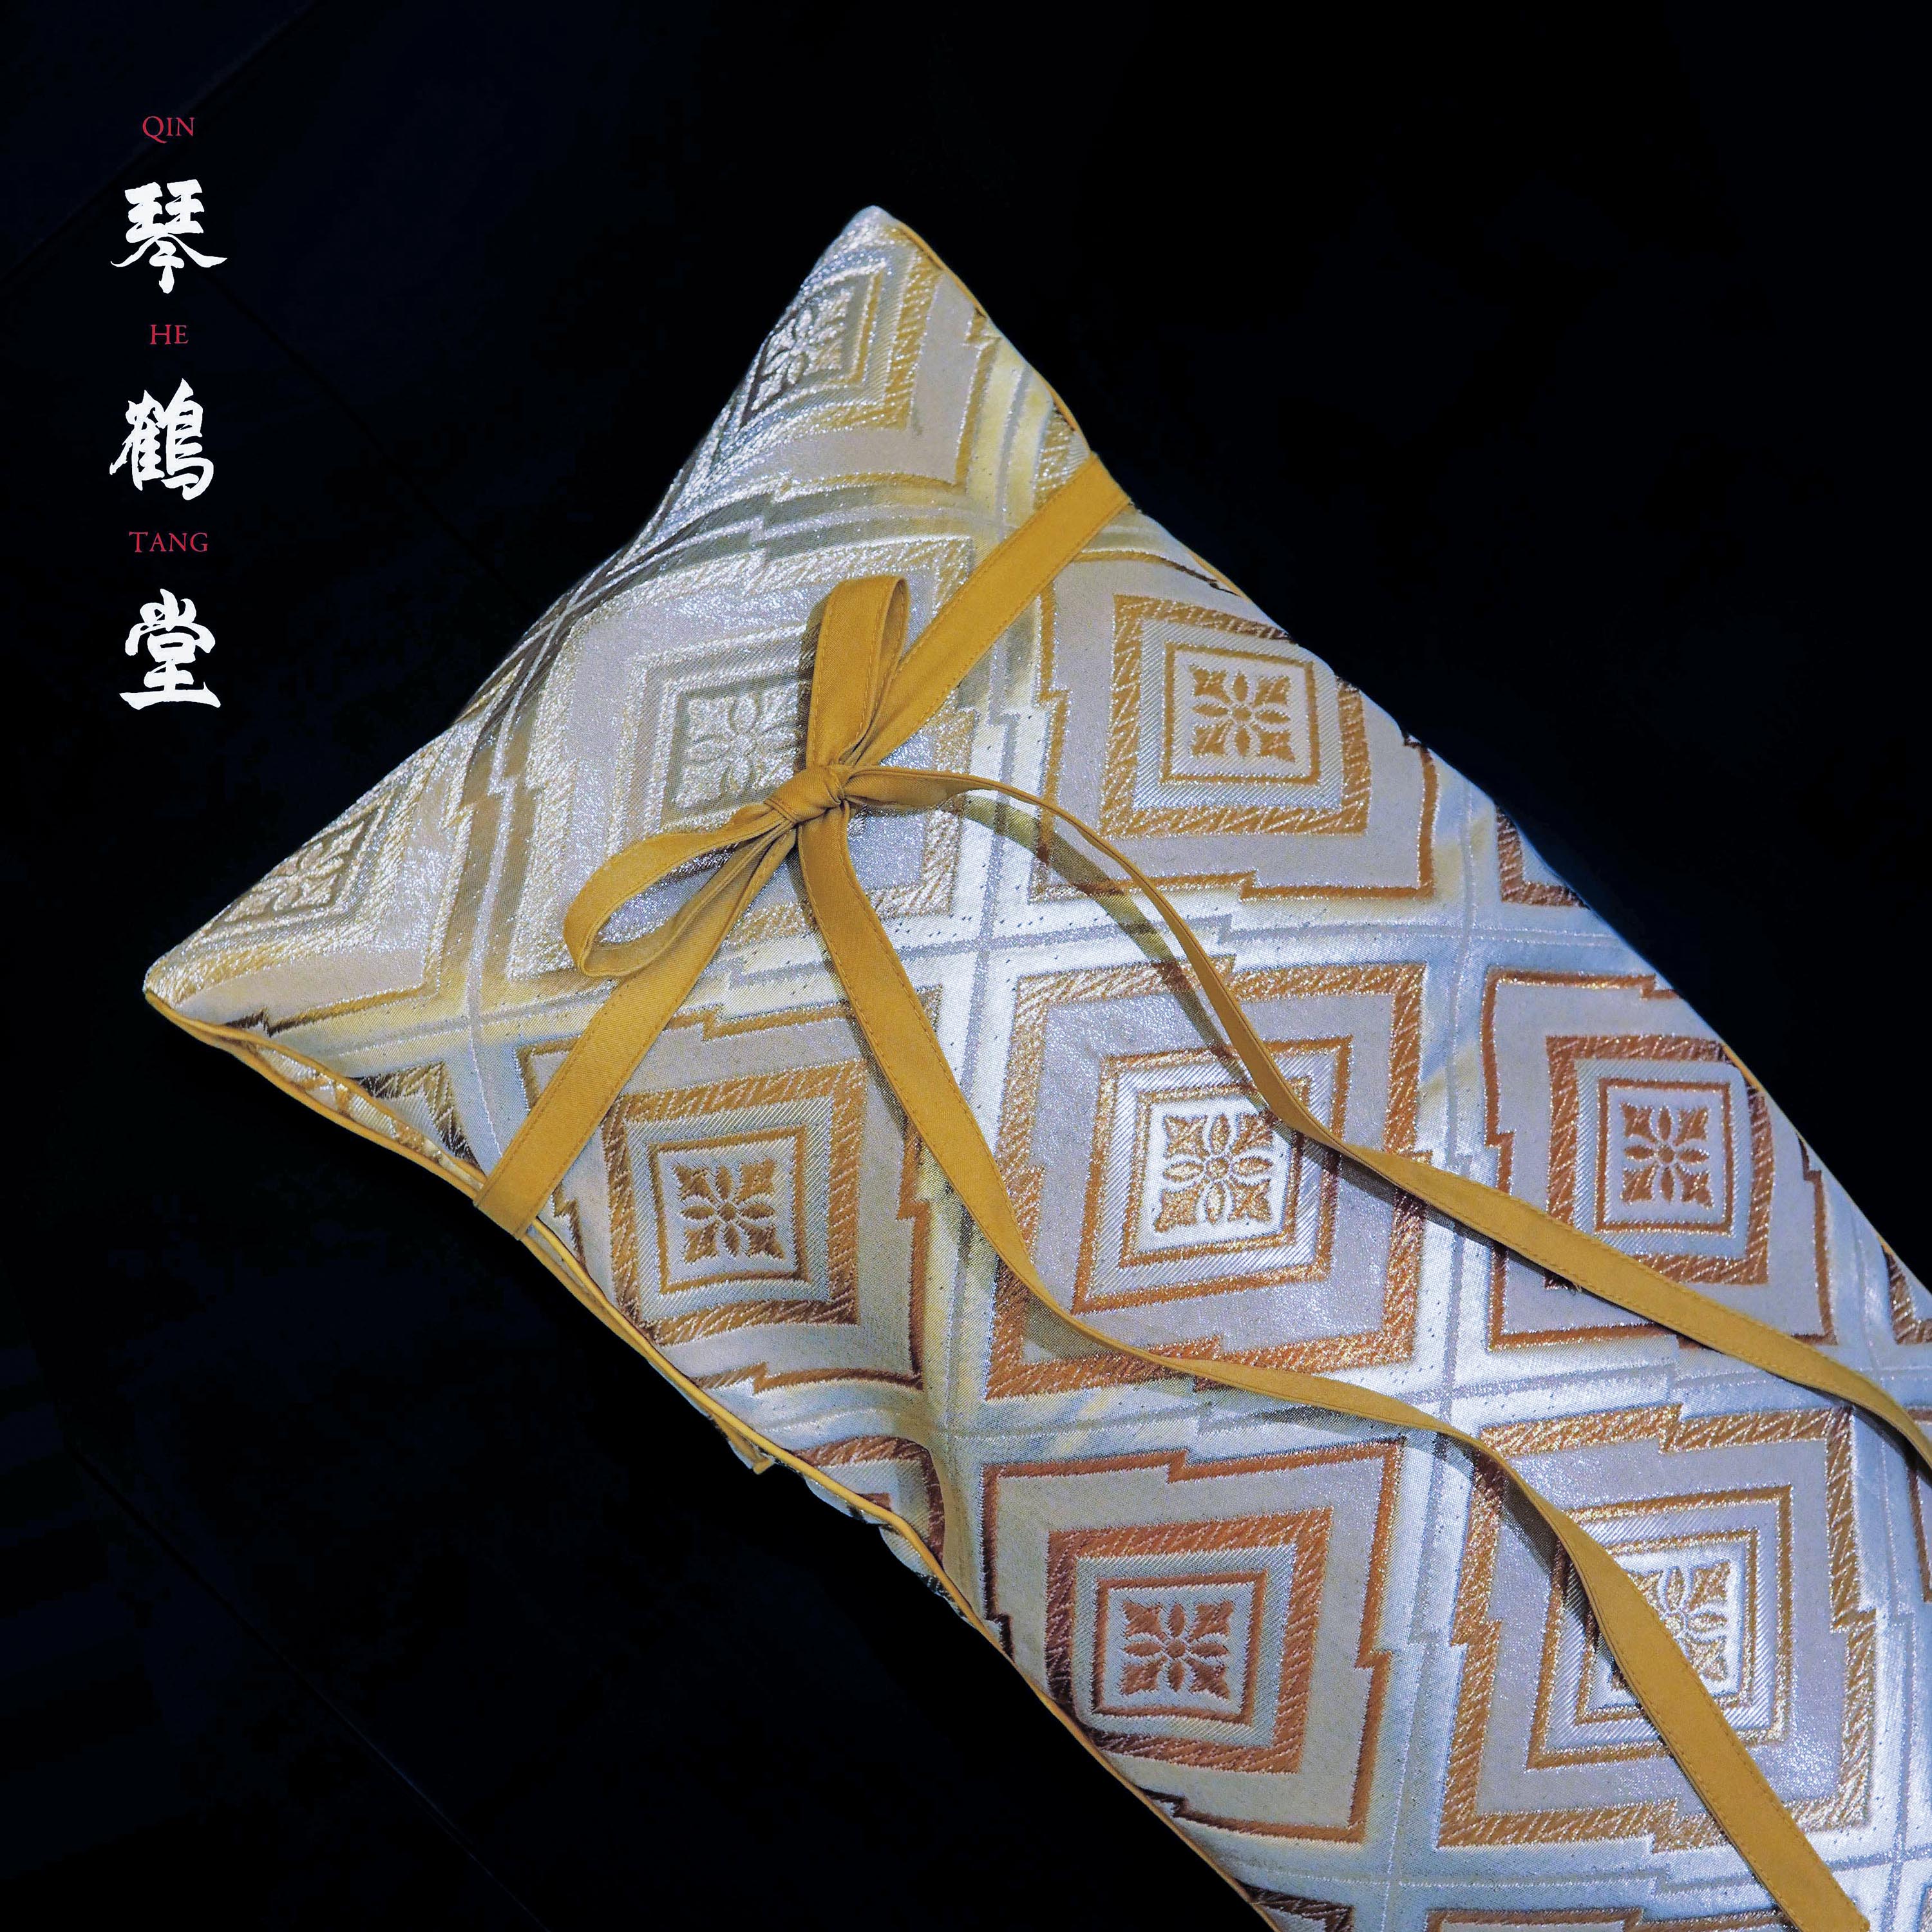 Harmony Essence" - Exquisite Vintage Guqin Bag with Luxurious Brocade Fabric,  Reinforced Traditional Chinese Musical Instrument Cover - Exclusive Handcrafted Masterpiece